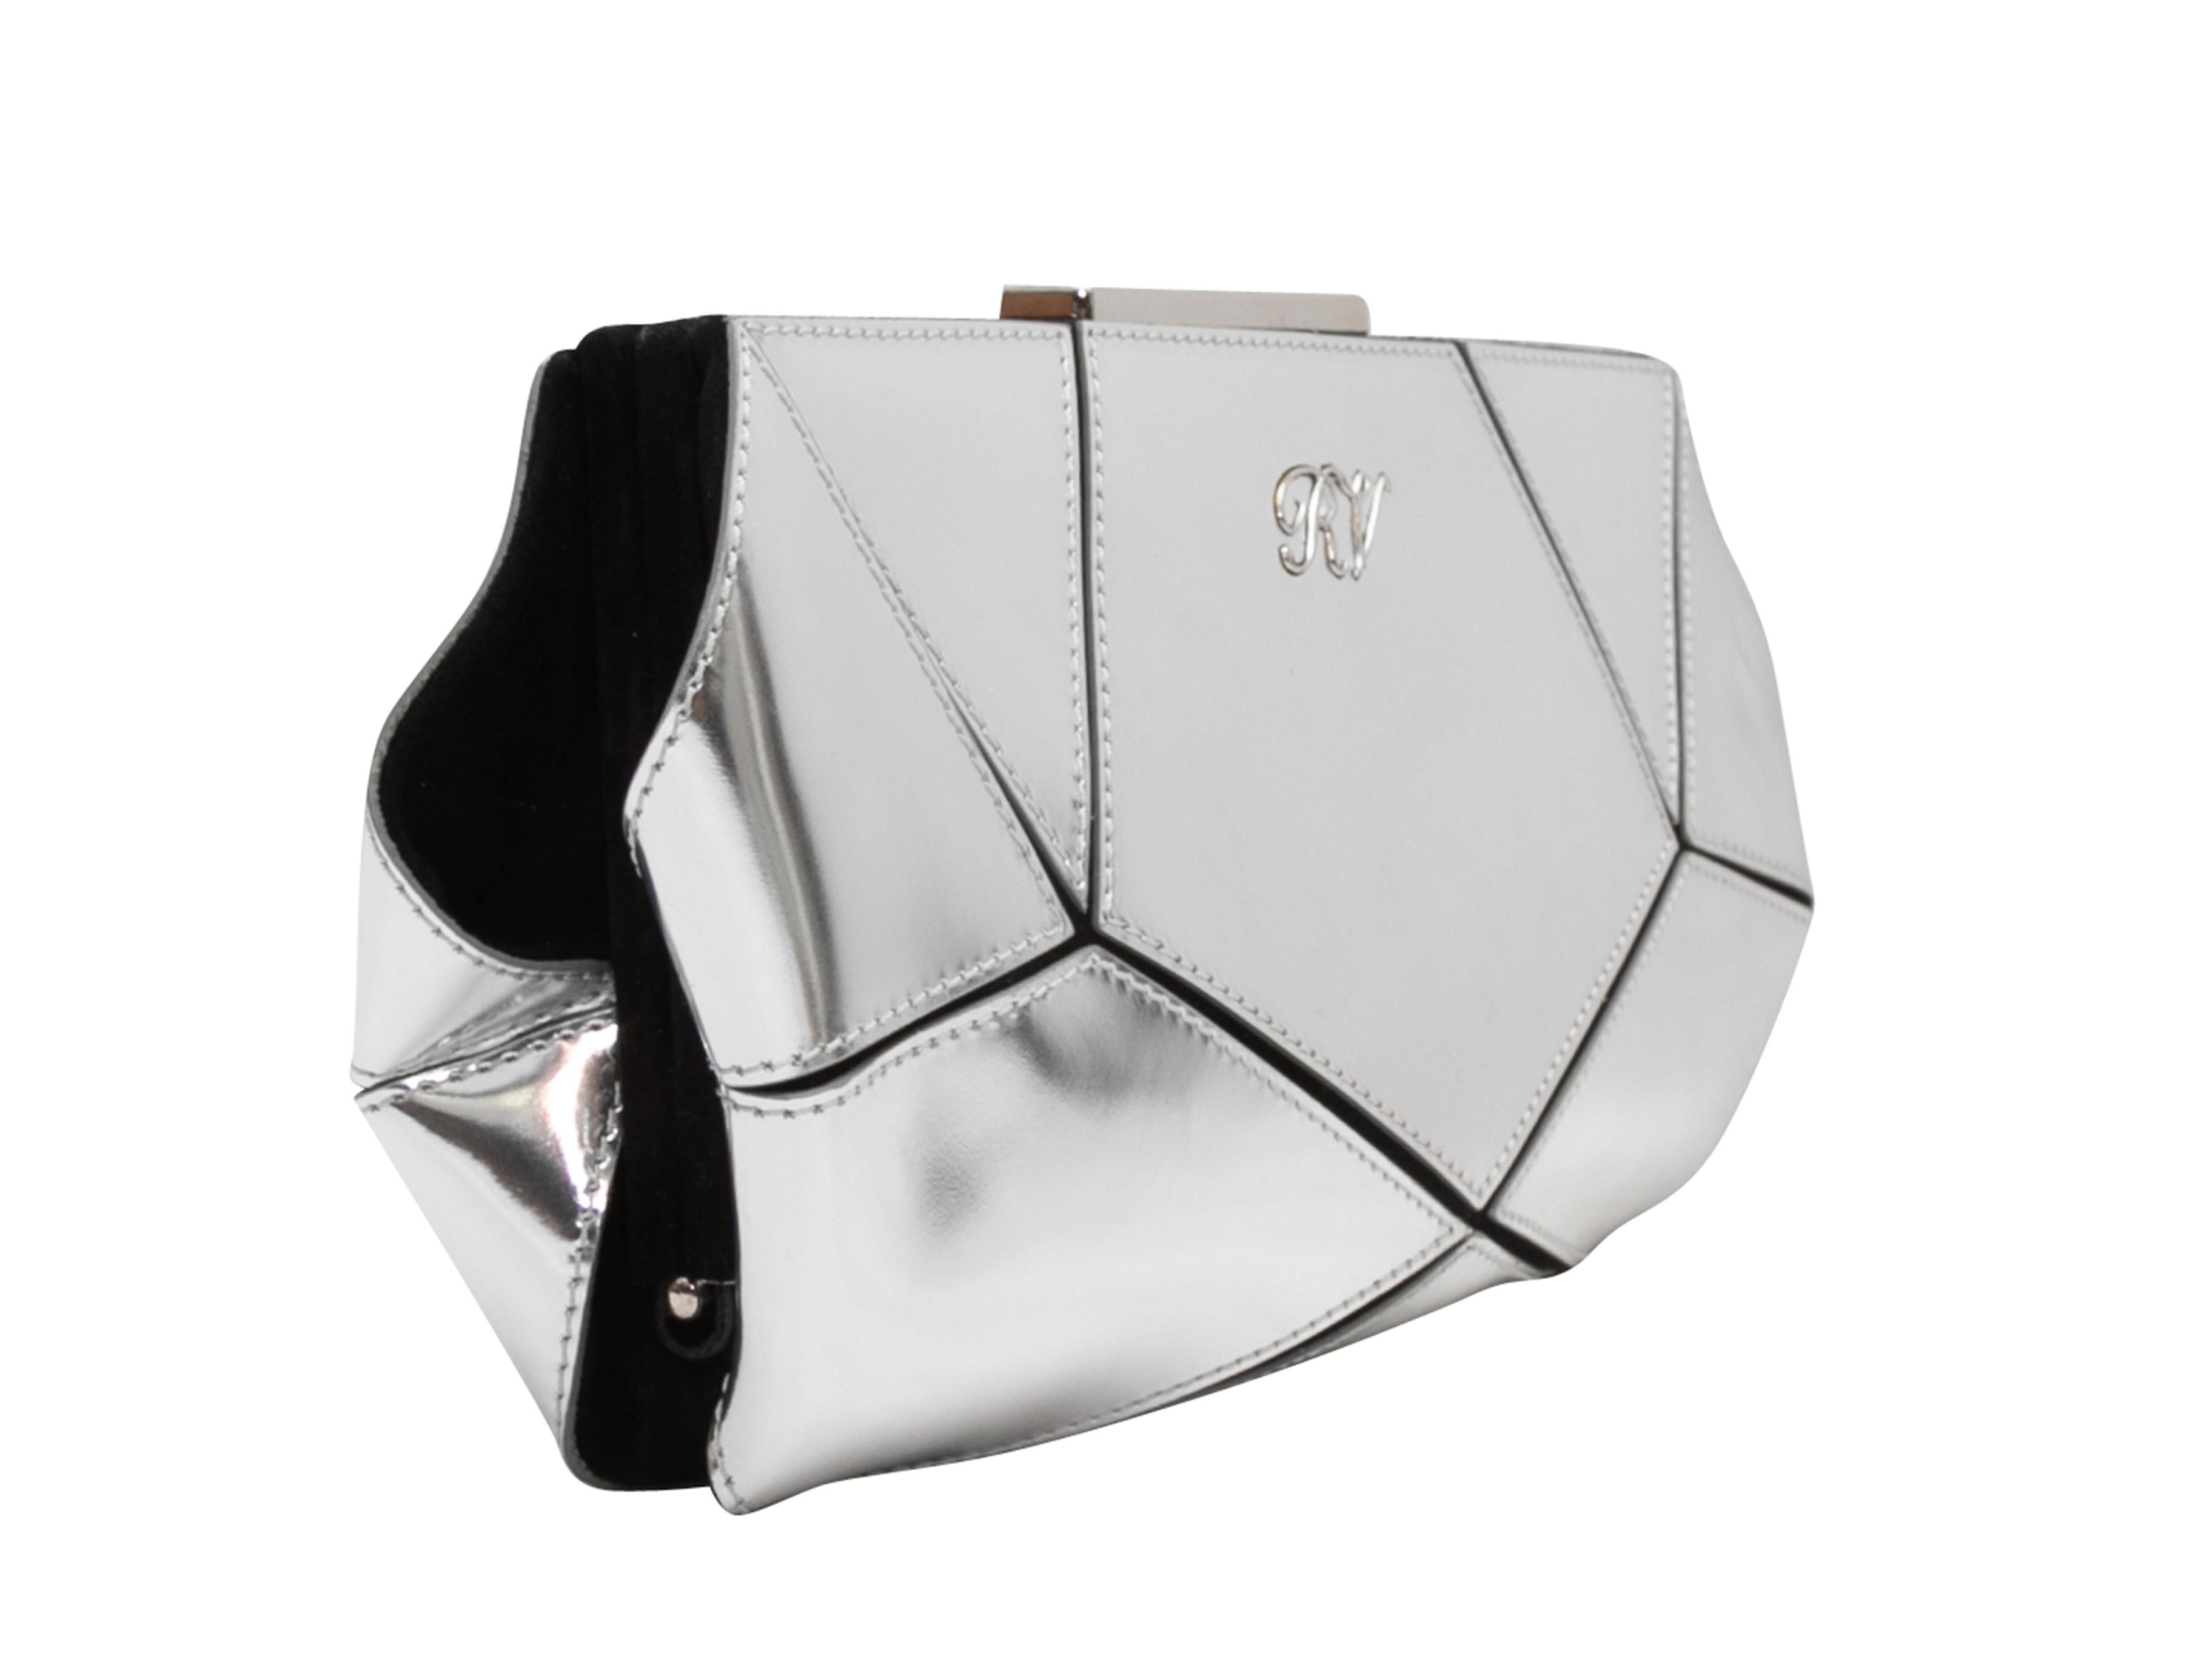 Silver Roger Vivier Small Patent Prismick Clutch. The Small Patent Prismick Clutch features a patent leather body, silver-tone hardware, and a top clasp closure. 9